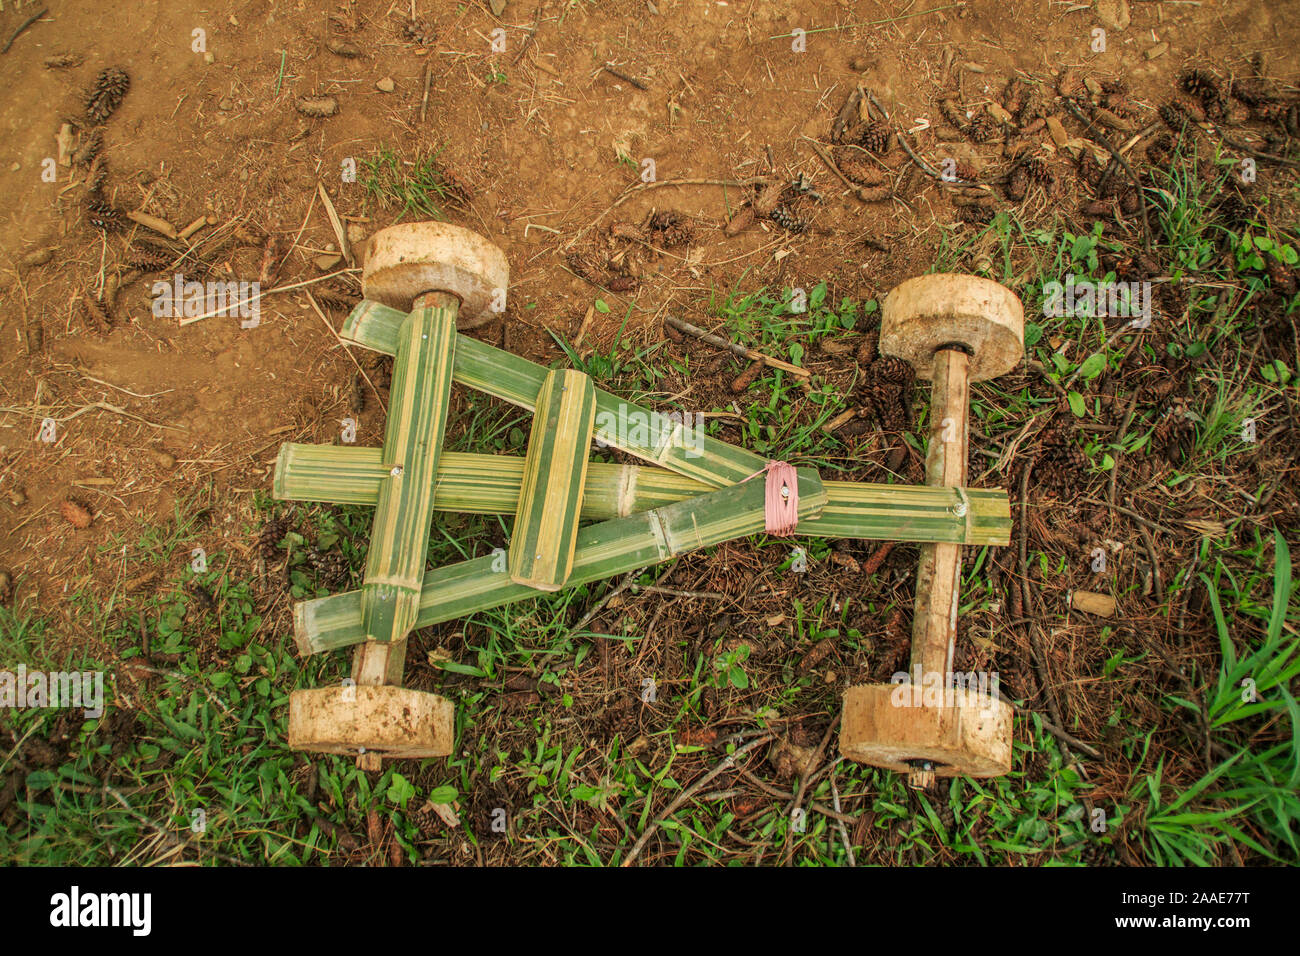 A bamboo car seen in Batu Lonceng Village, Lembang.The traditional game is a hereditary tradition held during the growing season holidays as well as entertainment to villagers. Stock Photo